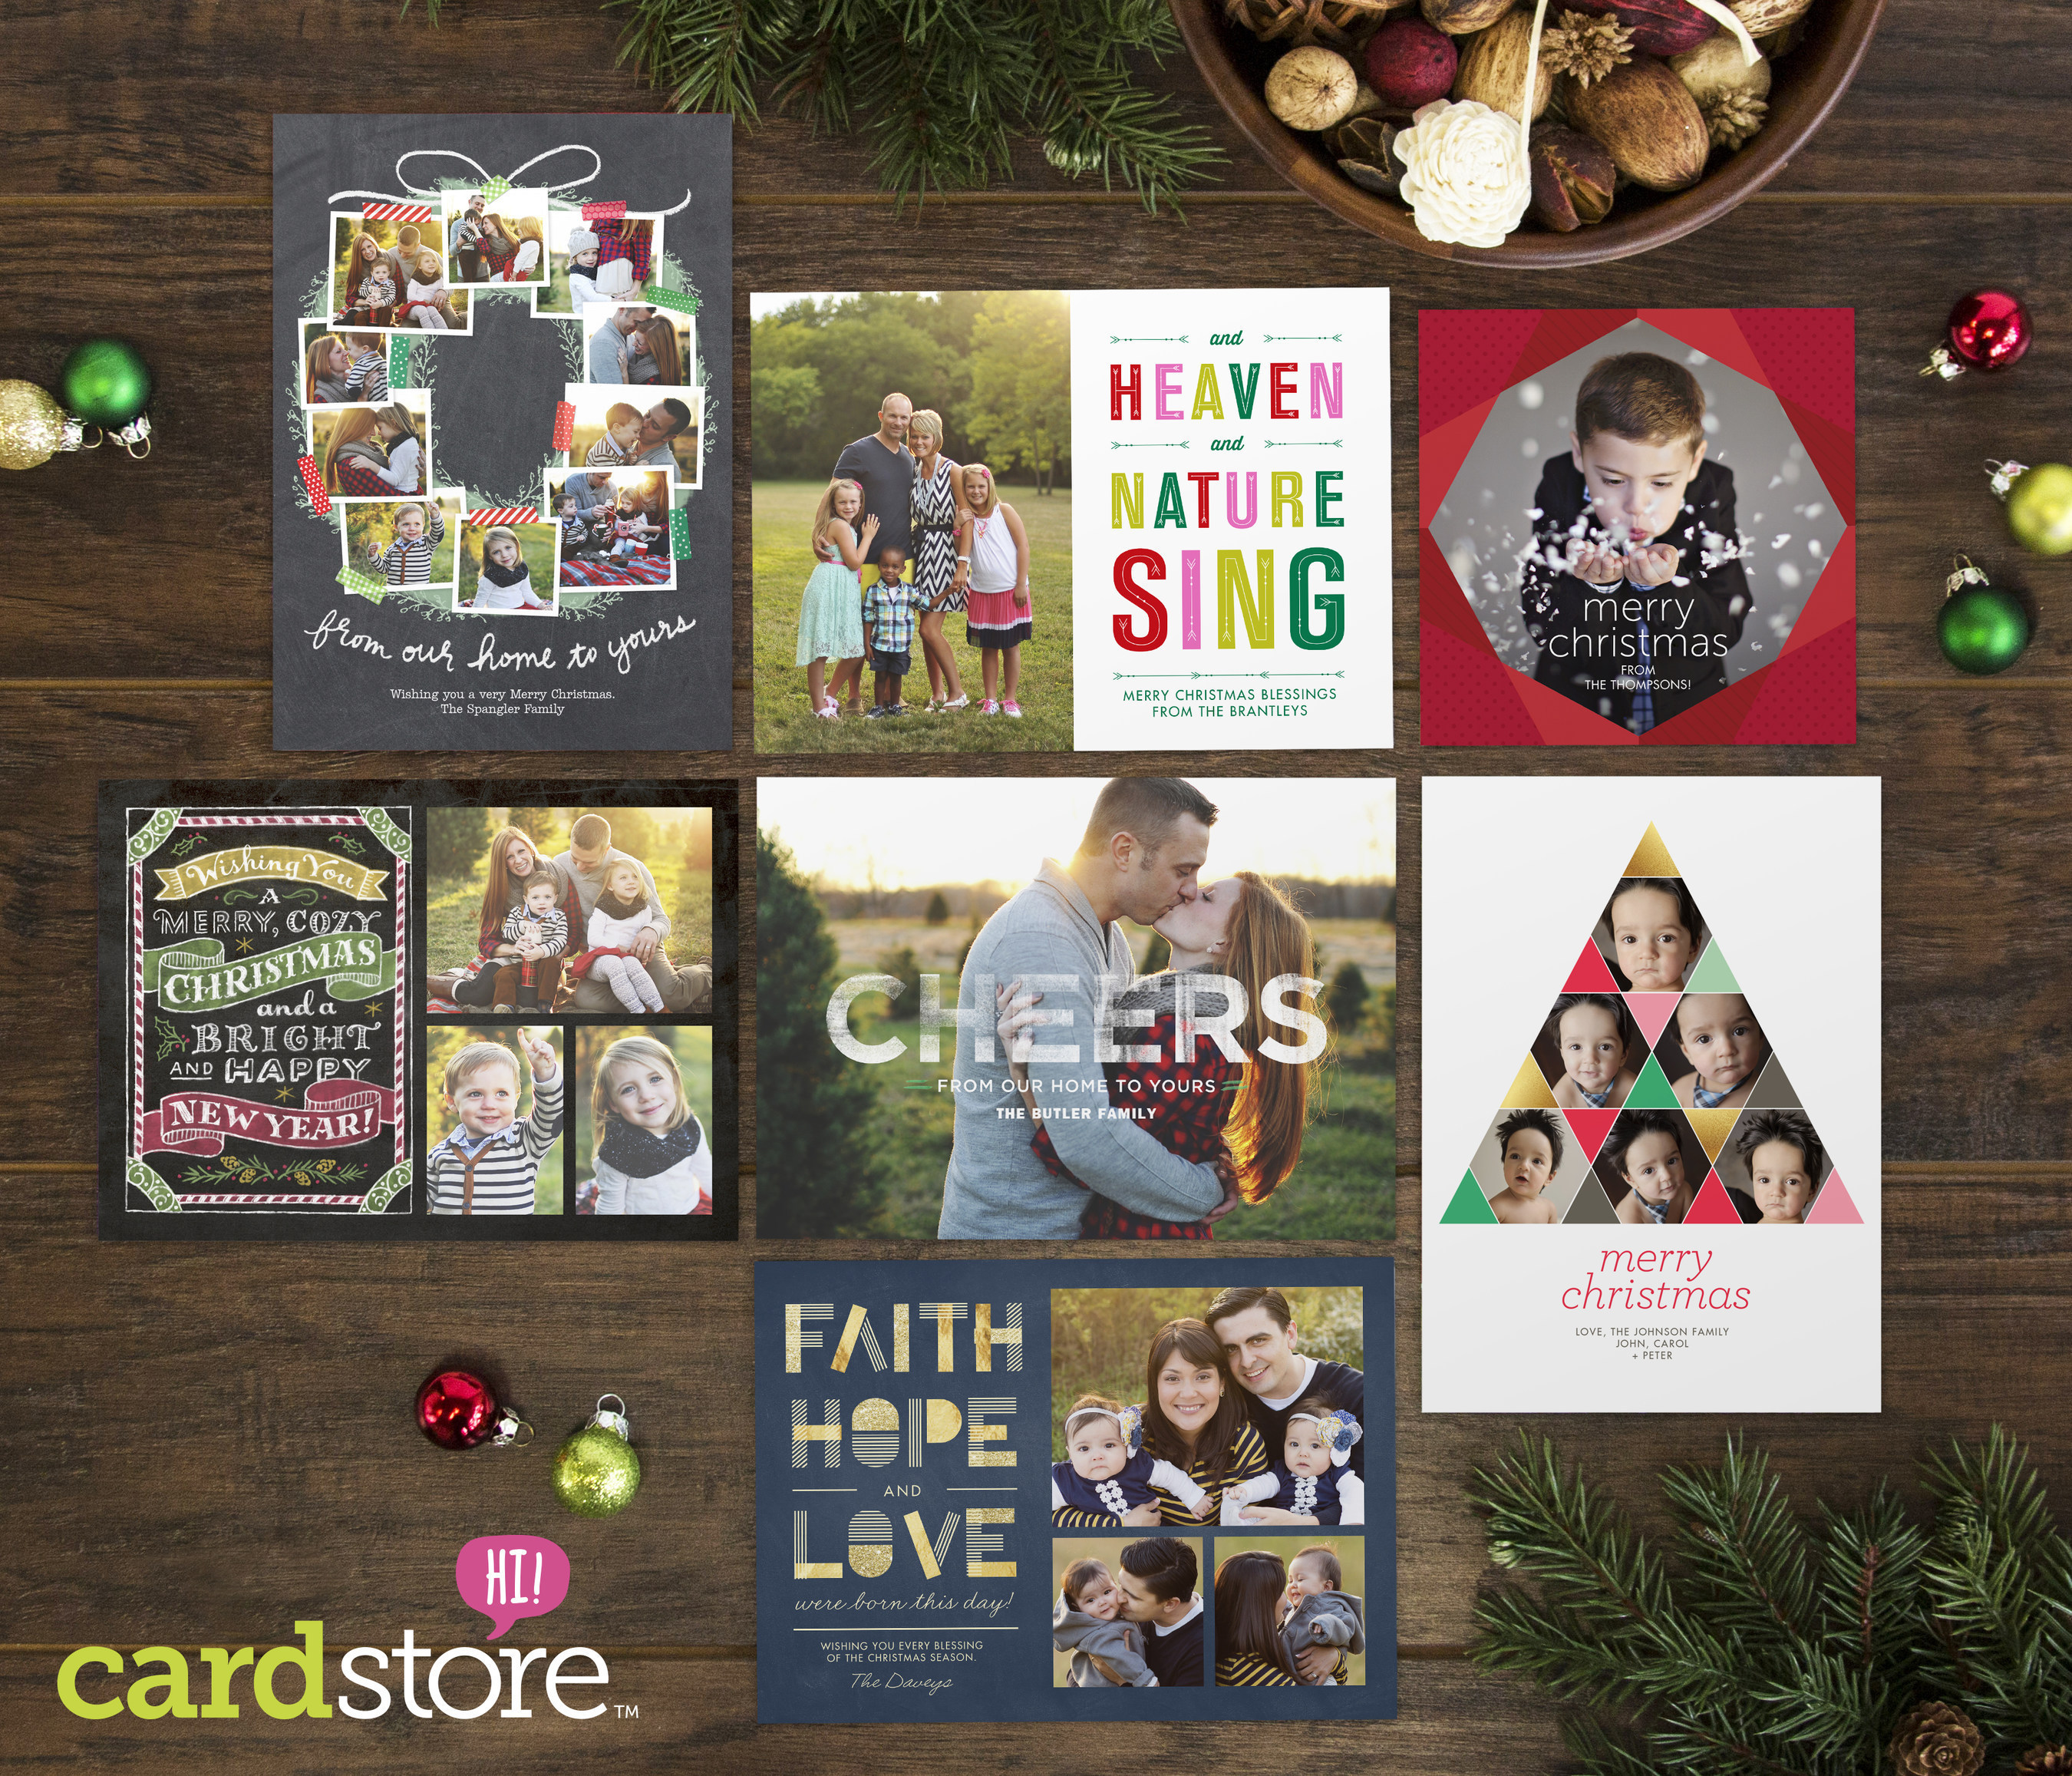 Tell Your Holiday Story with Beautiful Custom Greeting Cards from Cardstore!  New Holiday Design Collections Offer Nostalgic and Modern Options to Suit Every Style